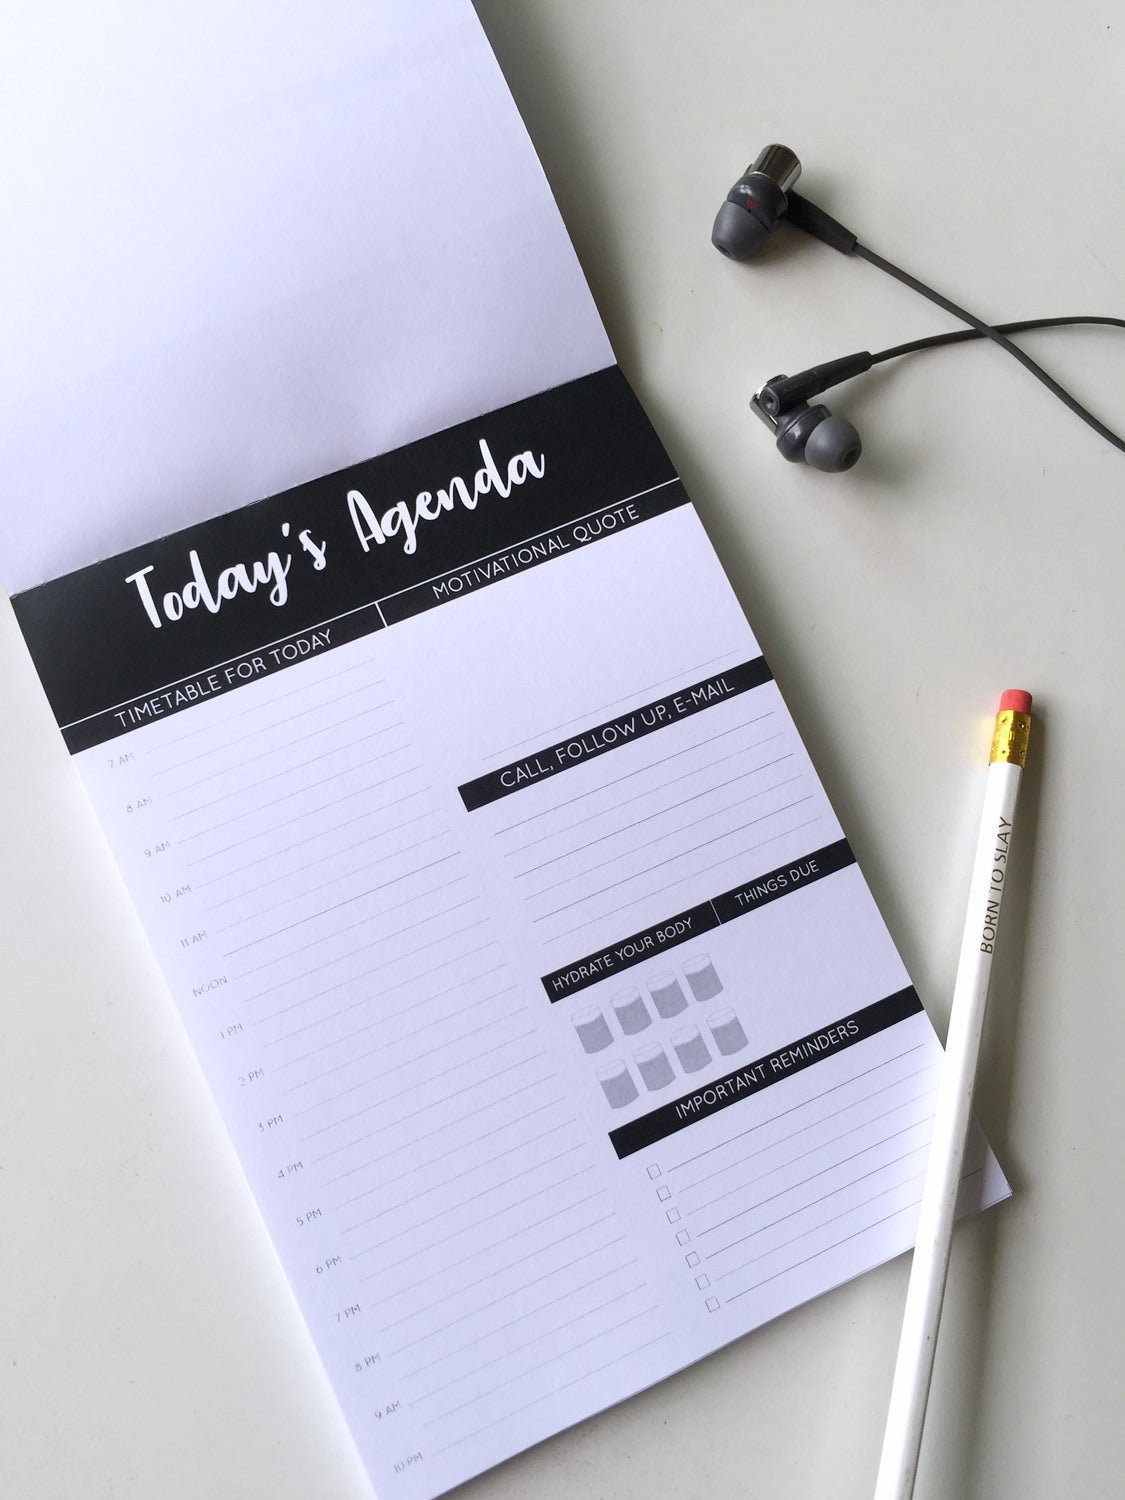 Today's Agenda- Daily Planner | A5 Size - Supple Room